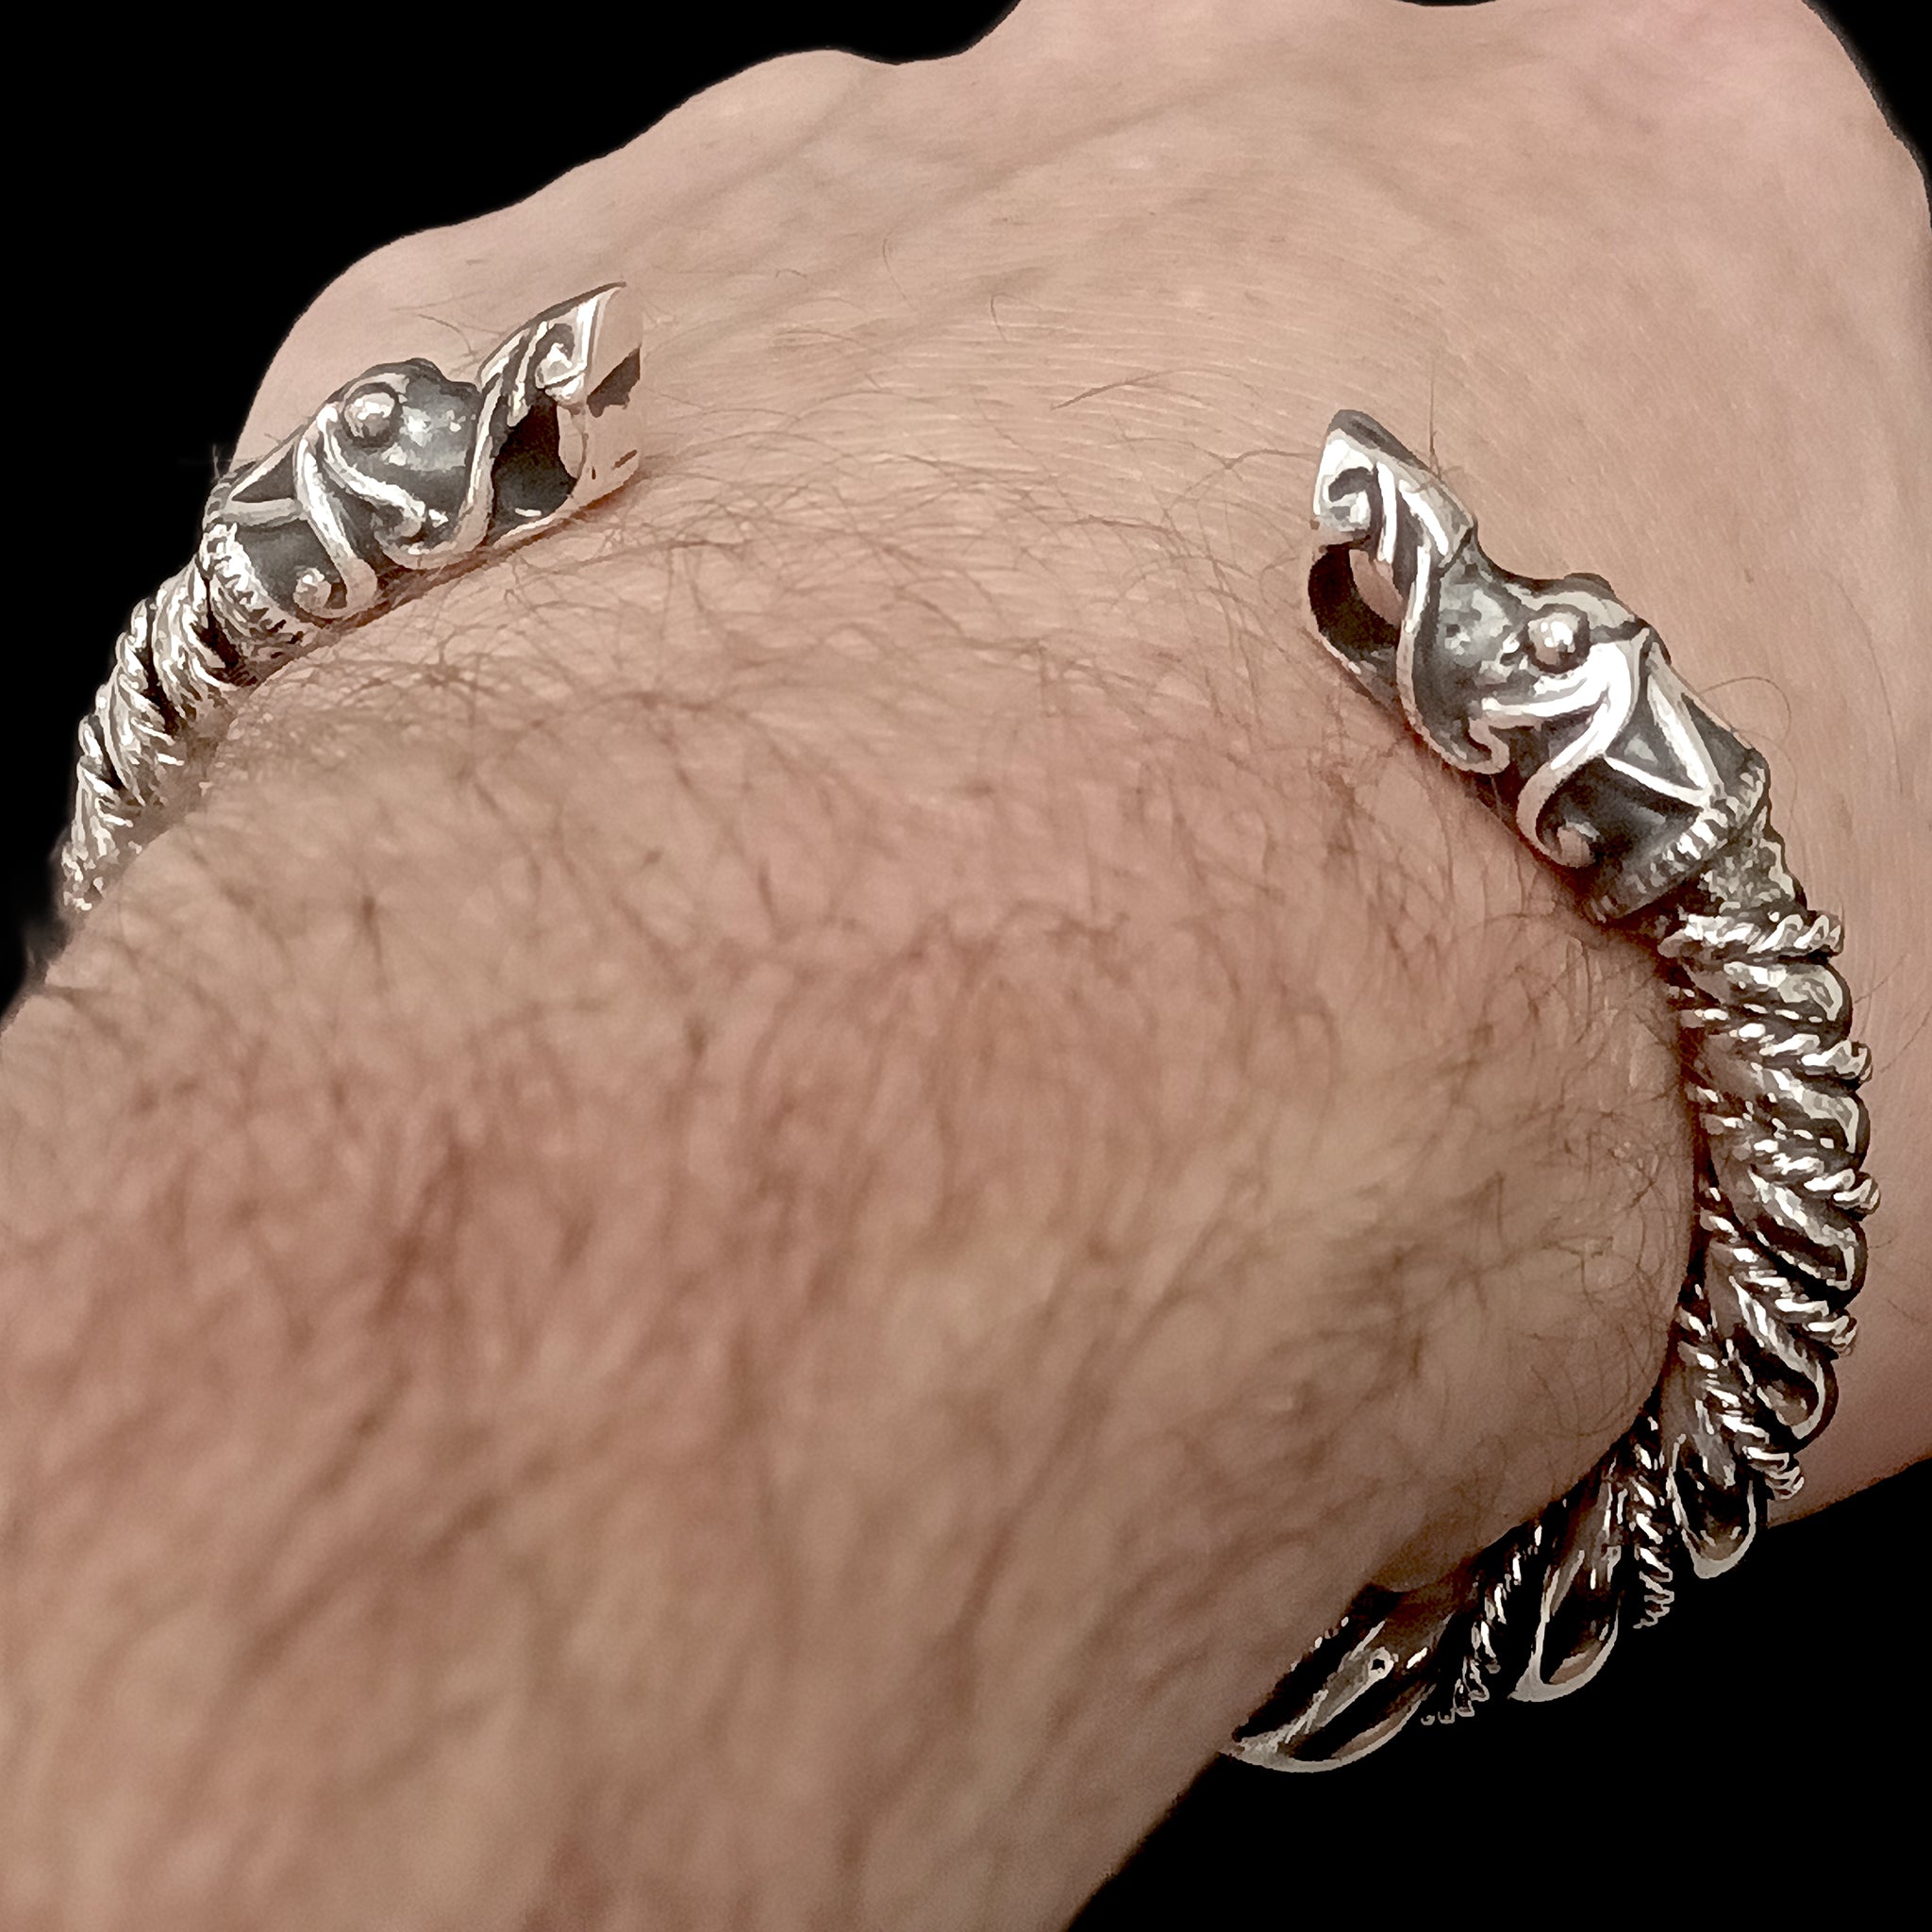 Thick Twisted Silver Arm Ring With Gotlandic Dragon Heads on Wrist